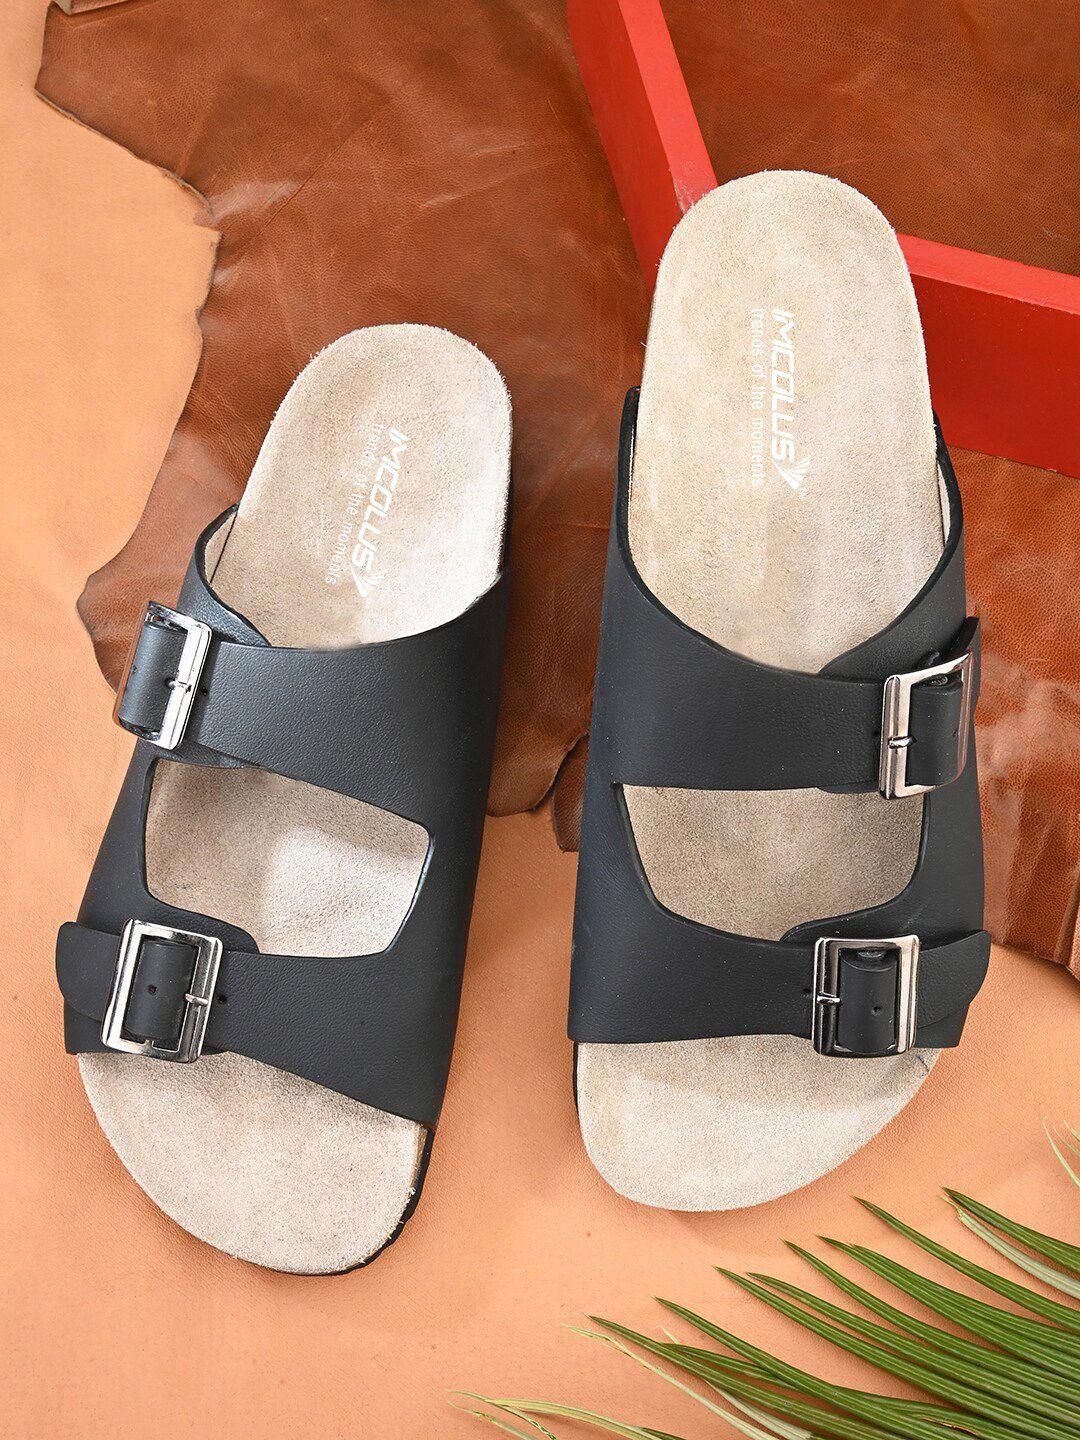 imcolus comfort sandals with buckles